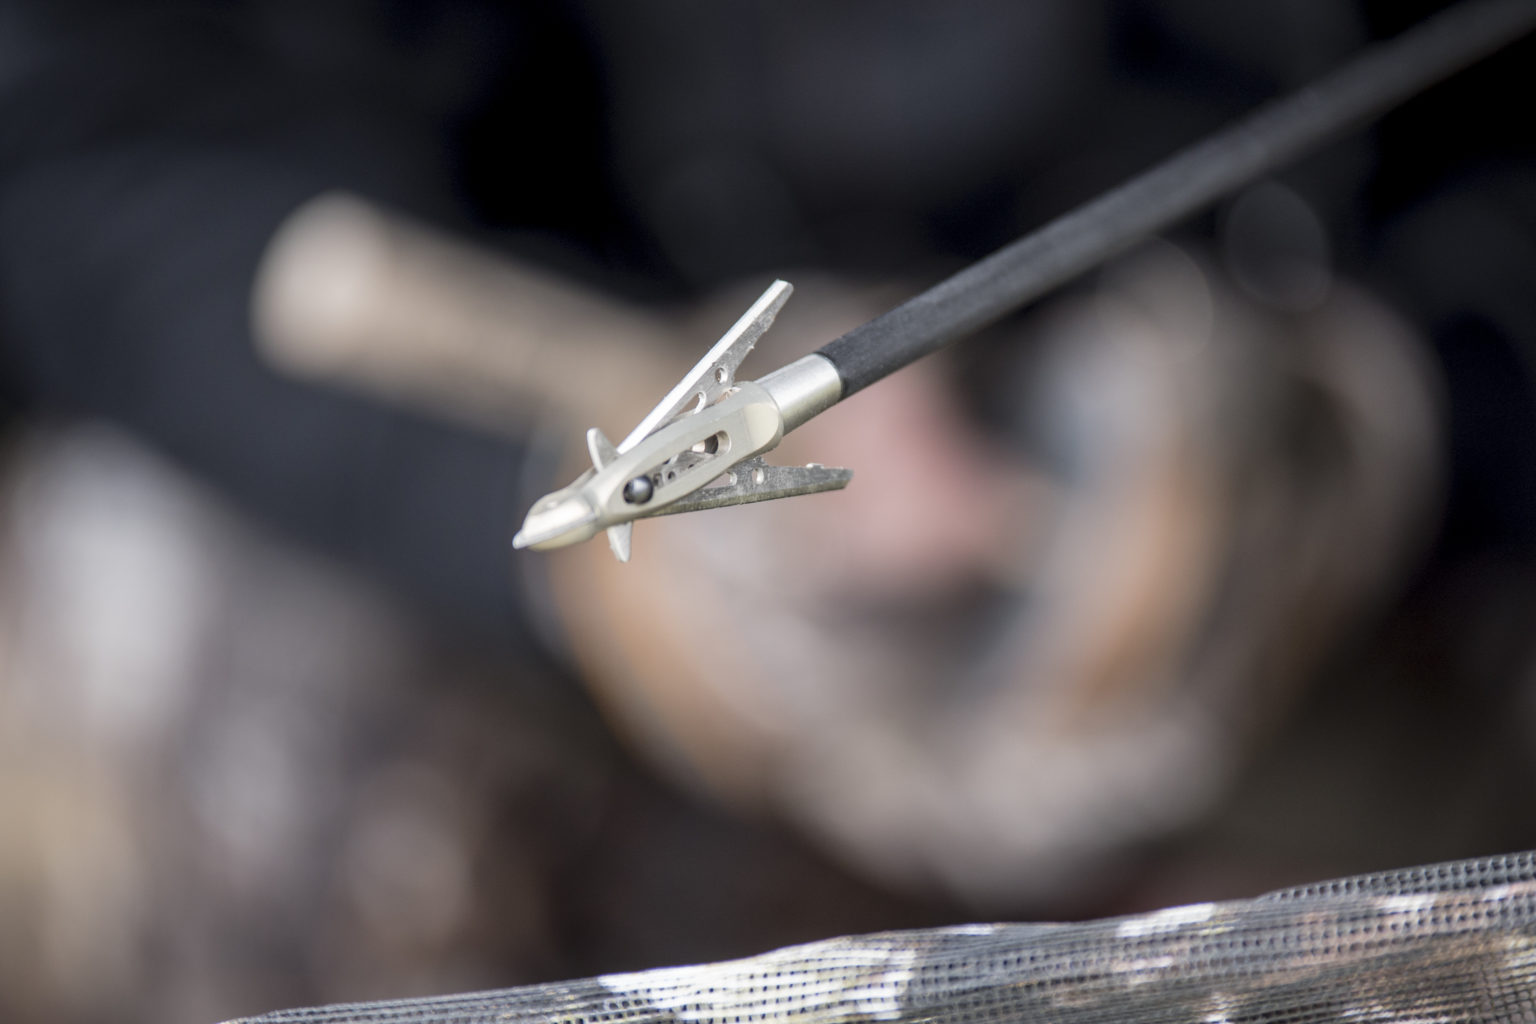 Best Broadheads For Whitetail Deer